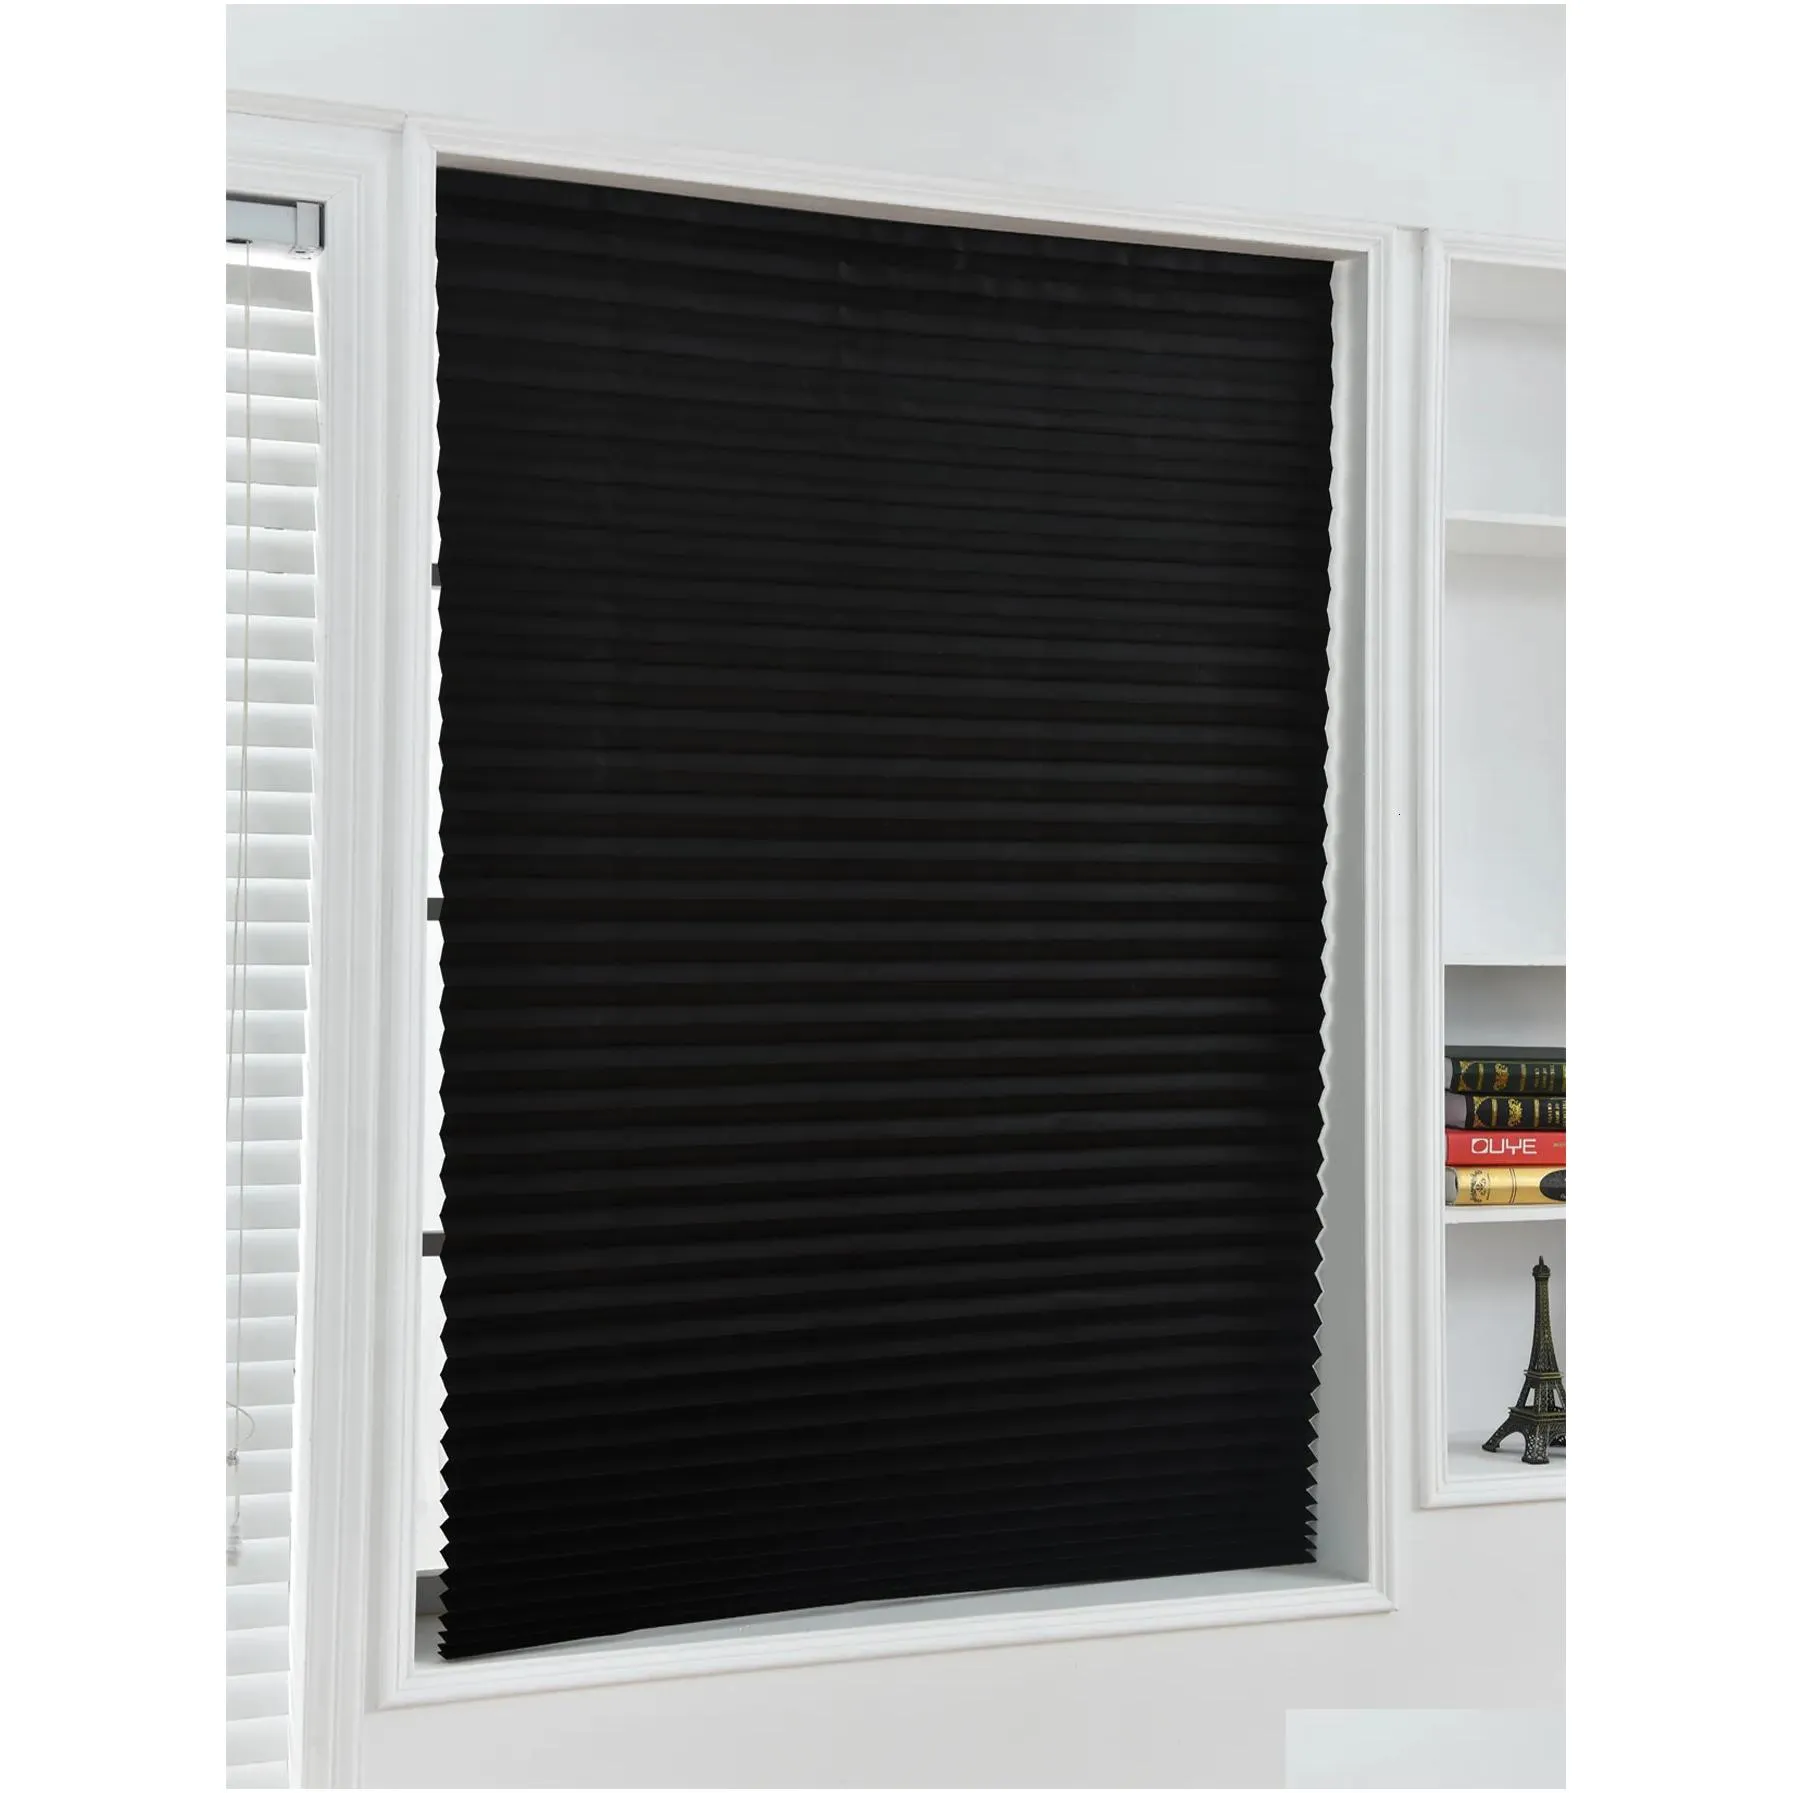 blinds adhesive window pleated zebra blinds and shades blind roller blackout curtain for bedroom living room balcony 230529